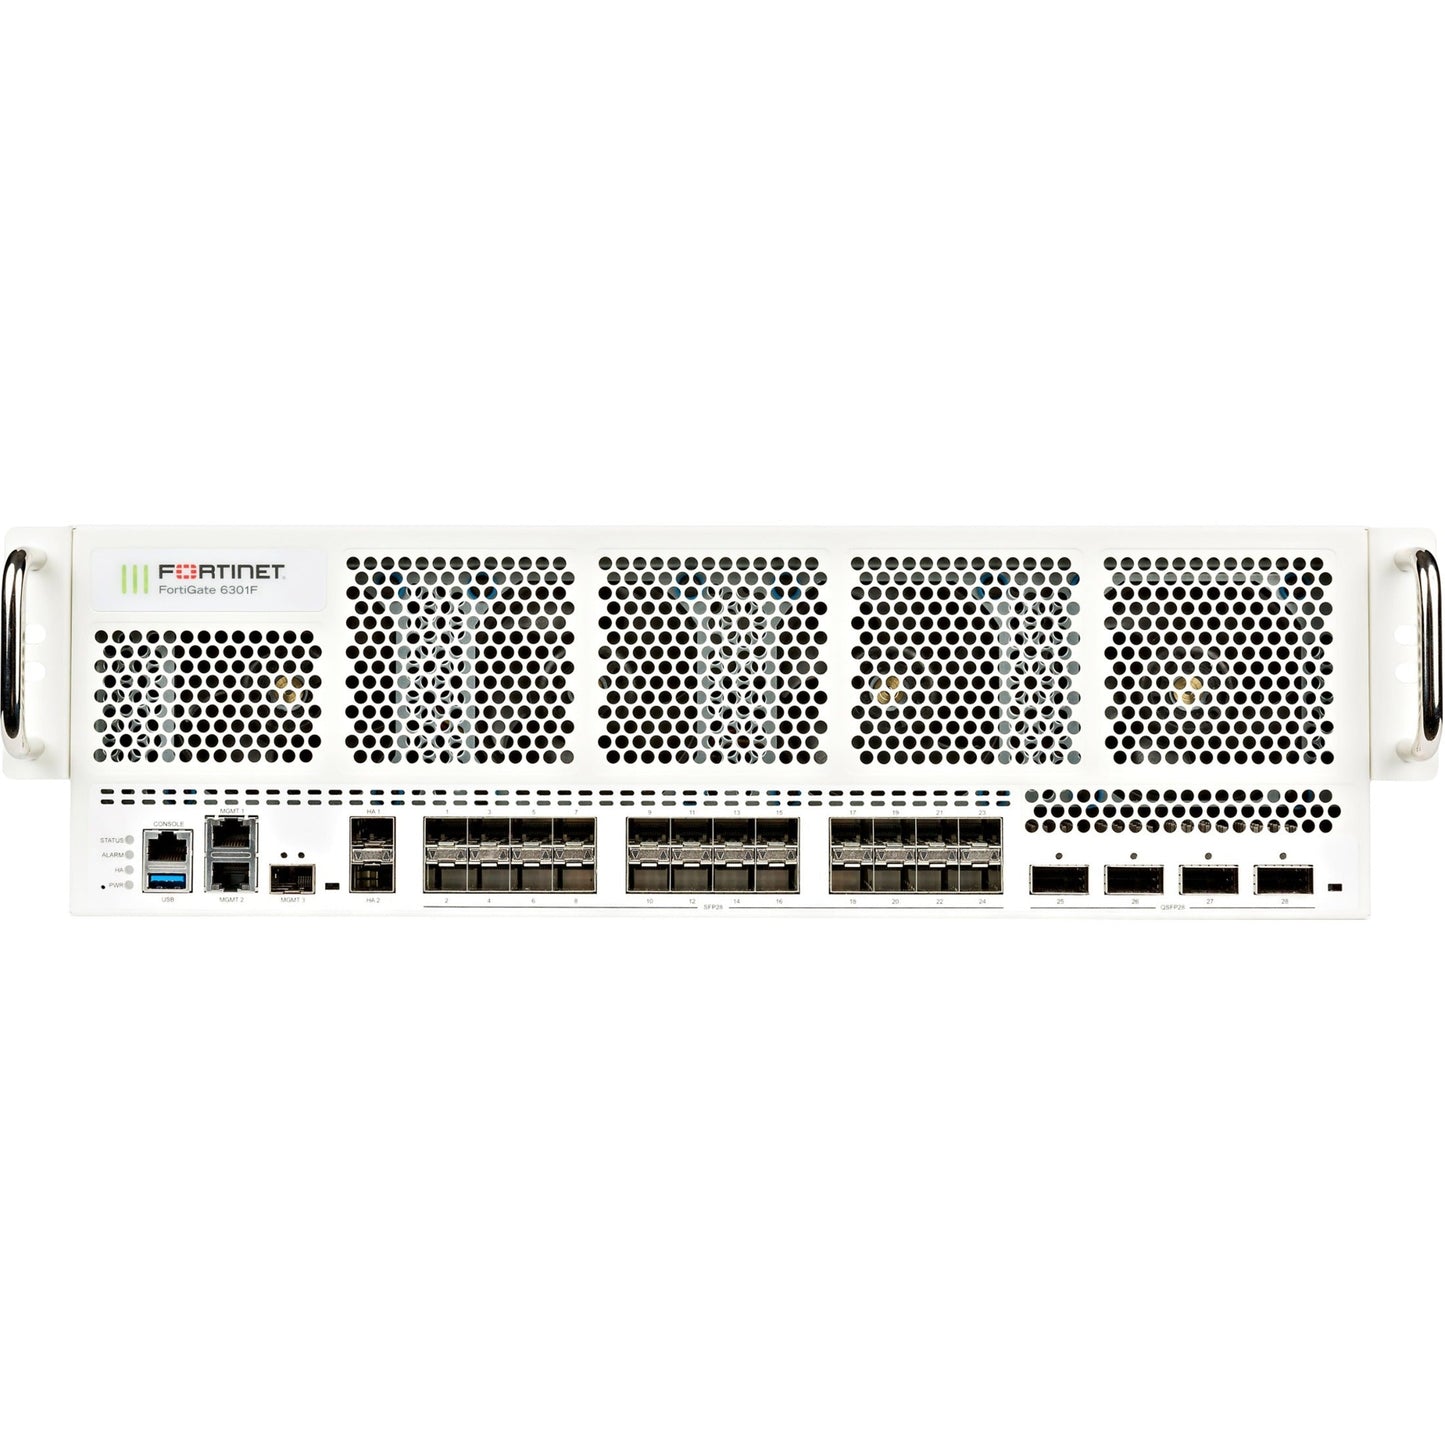 Fortinet FortiGate FG-6301F-DC Network Security/Firewall Appliance